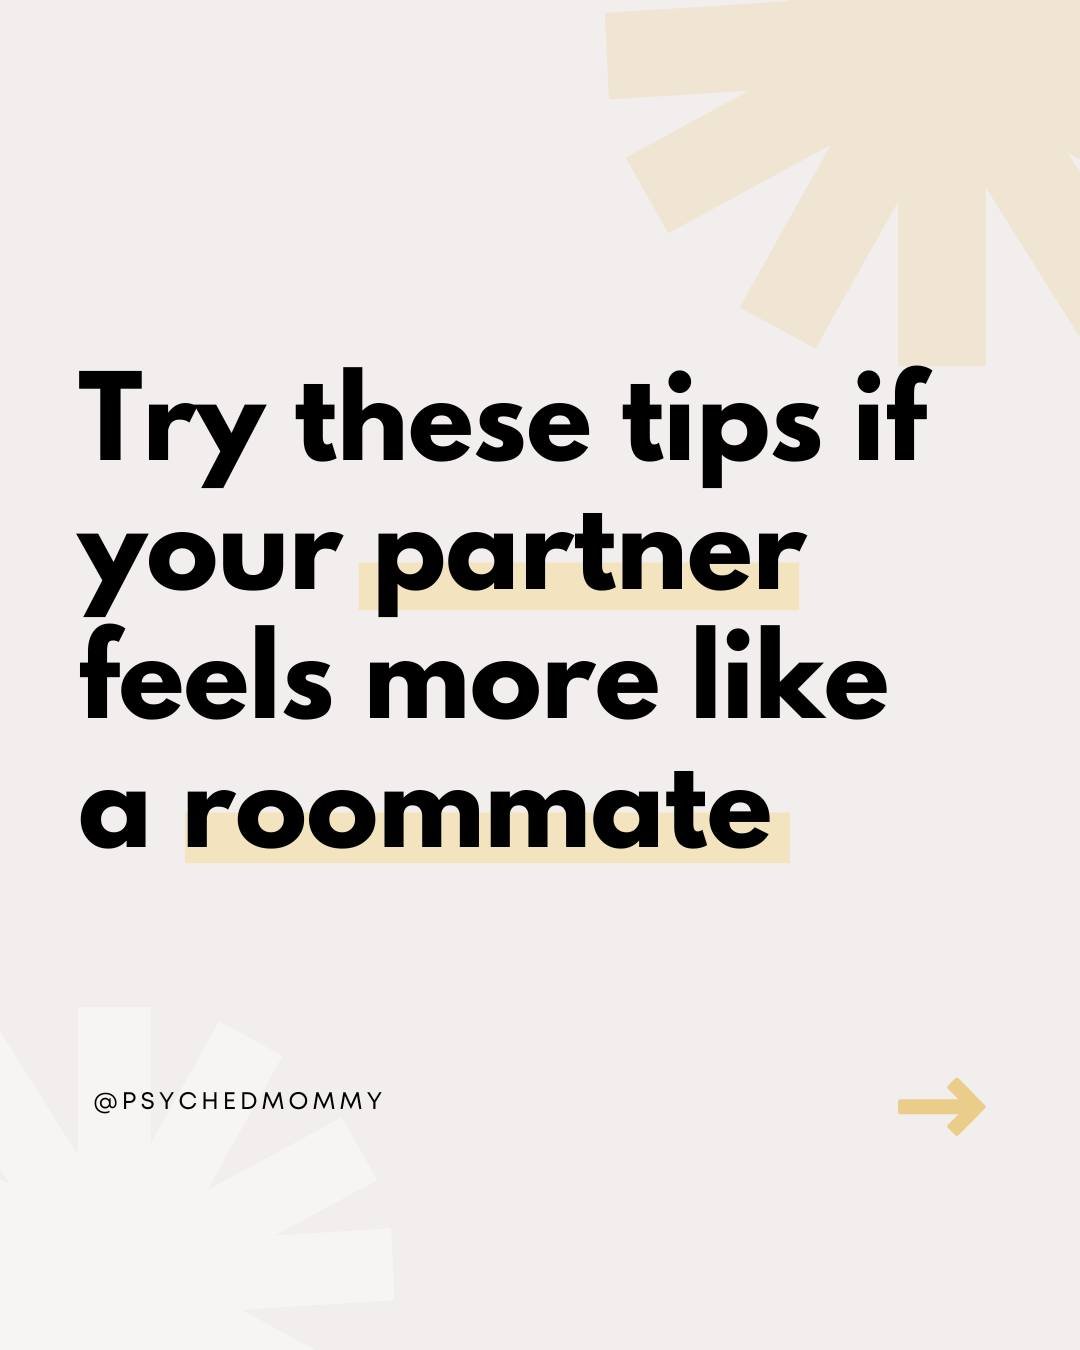 Since having kids, it might feel like most of your conversations with your partner are transactional.⁠
⁠
We ask quick, yes/no questions to get the basic info we need to continue with our to-do lists. Or, we make awkward small talk before bed just so 